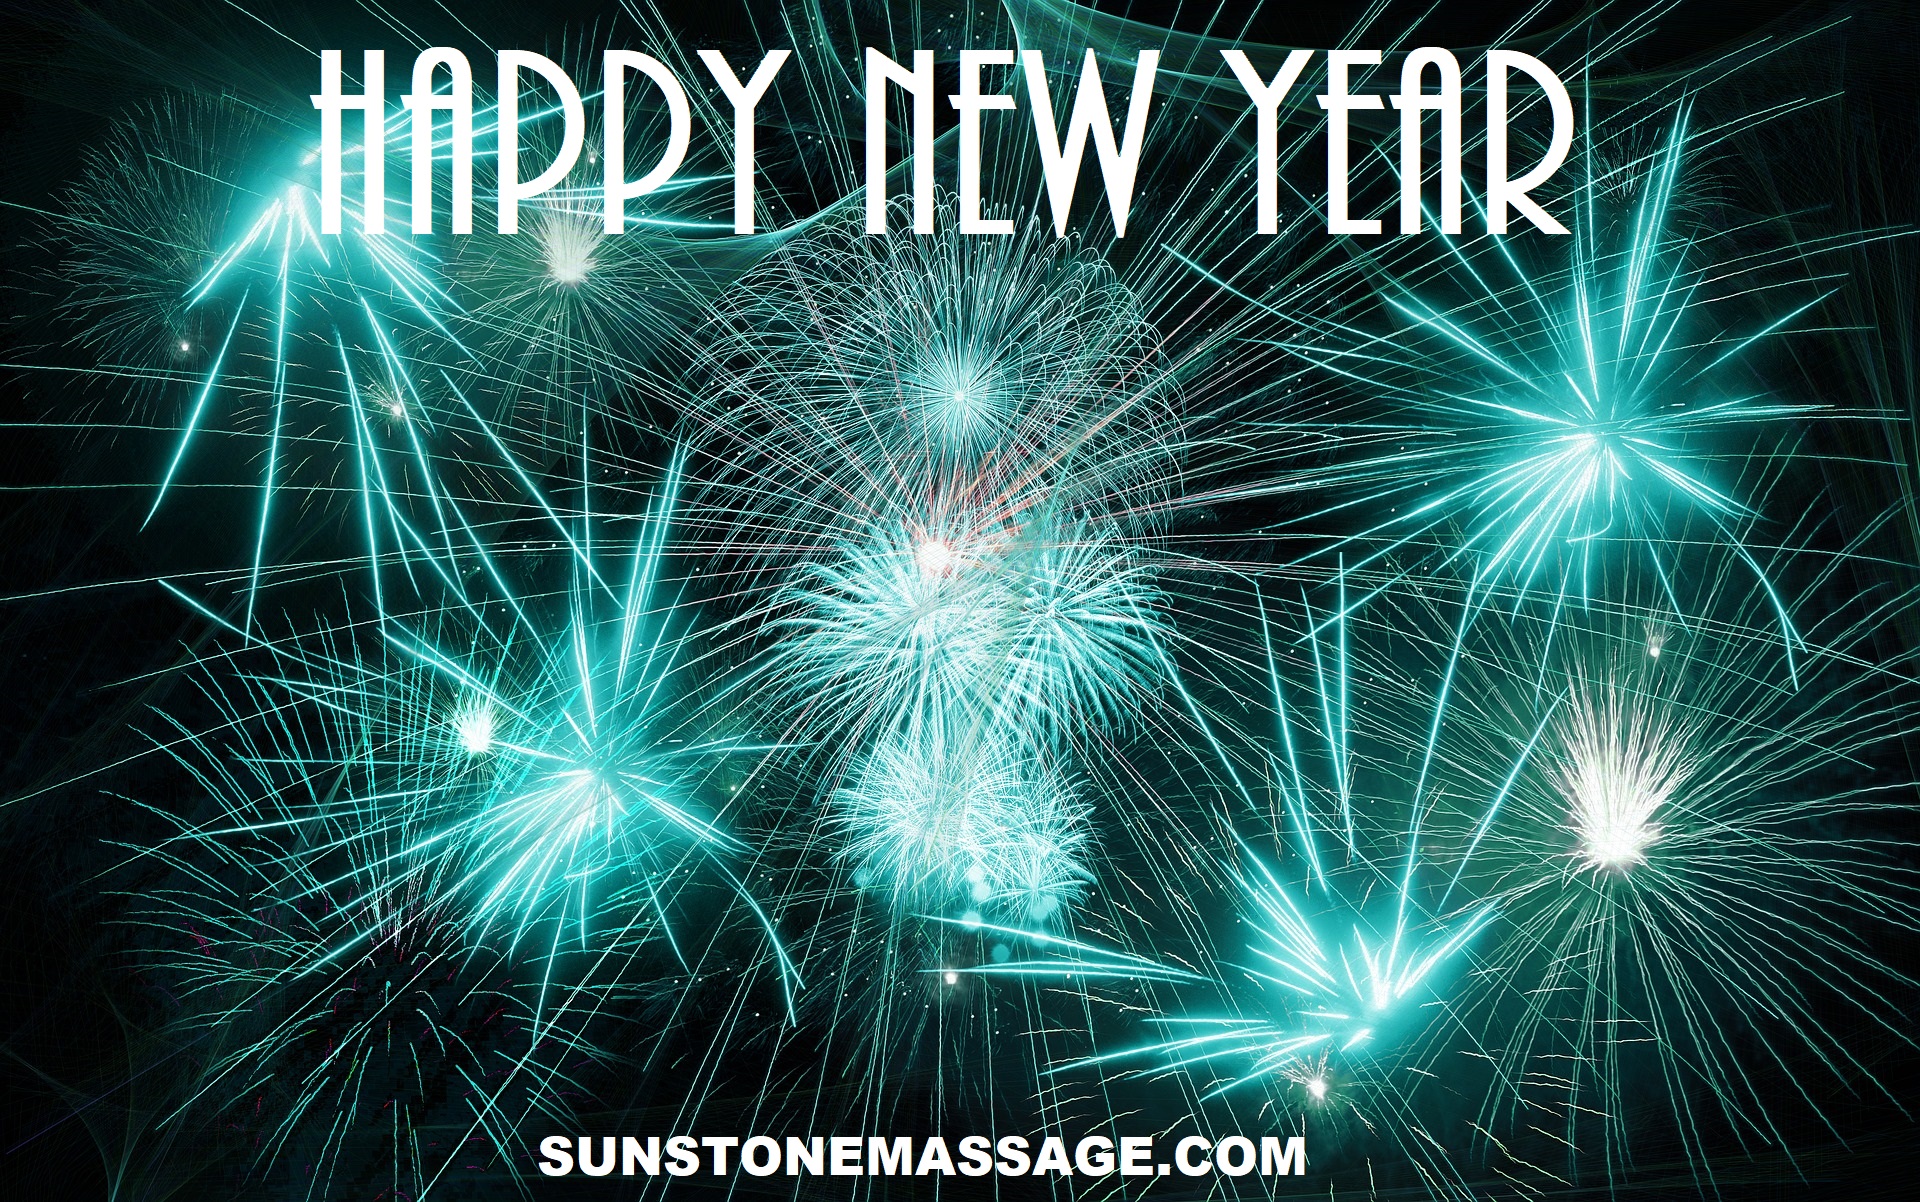 HAPPY NEW YEAR WISHES, IMAGES, GREETINGS AND MESSAGES WITH MASSAGE THERAPY